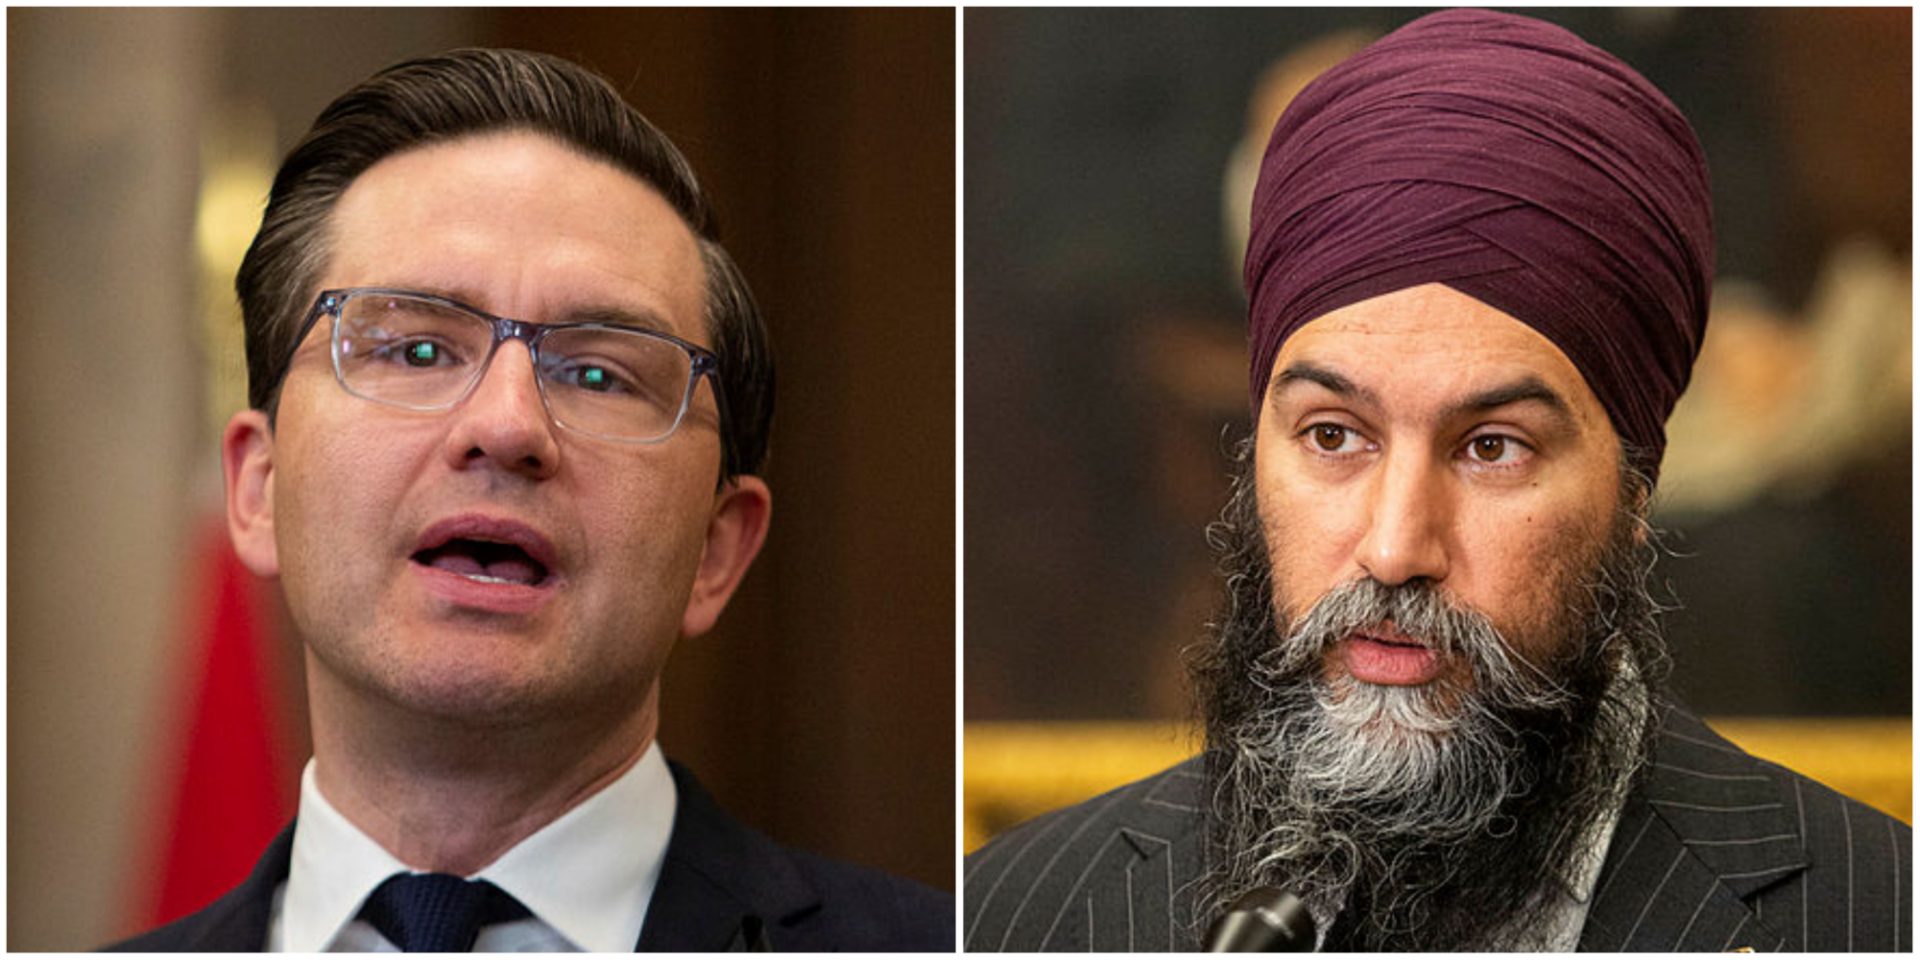 Conservative Leader Pierre Poilieve, left, has been continuing efforts to appeal to working-class voters, leading NDP Leader Jagmeet Singh to focus on shoring up his party's support in that area, says Conservative strategist Shakir Chambers. Andrew Meade